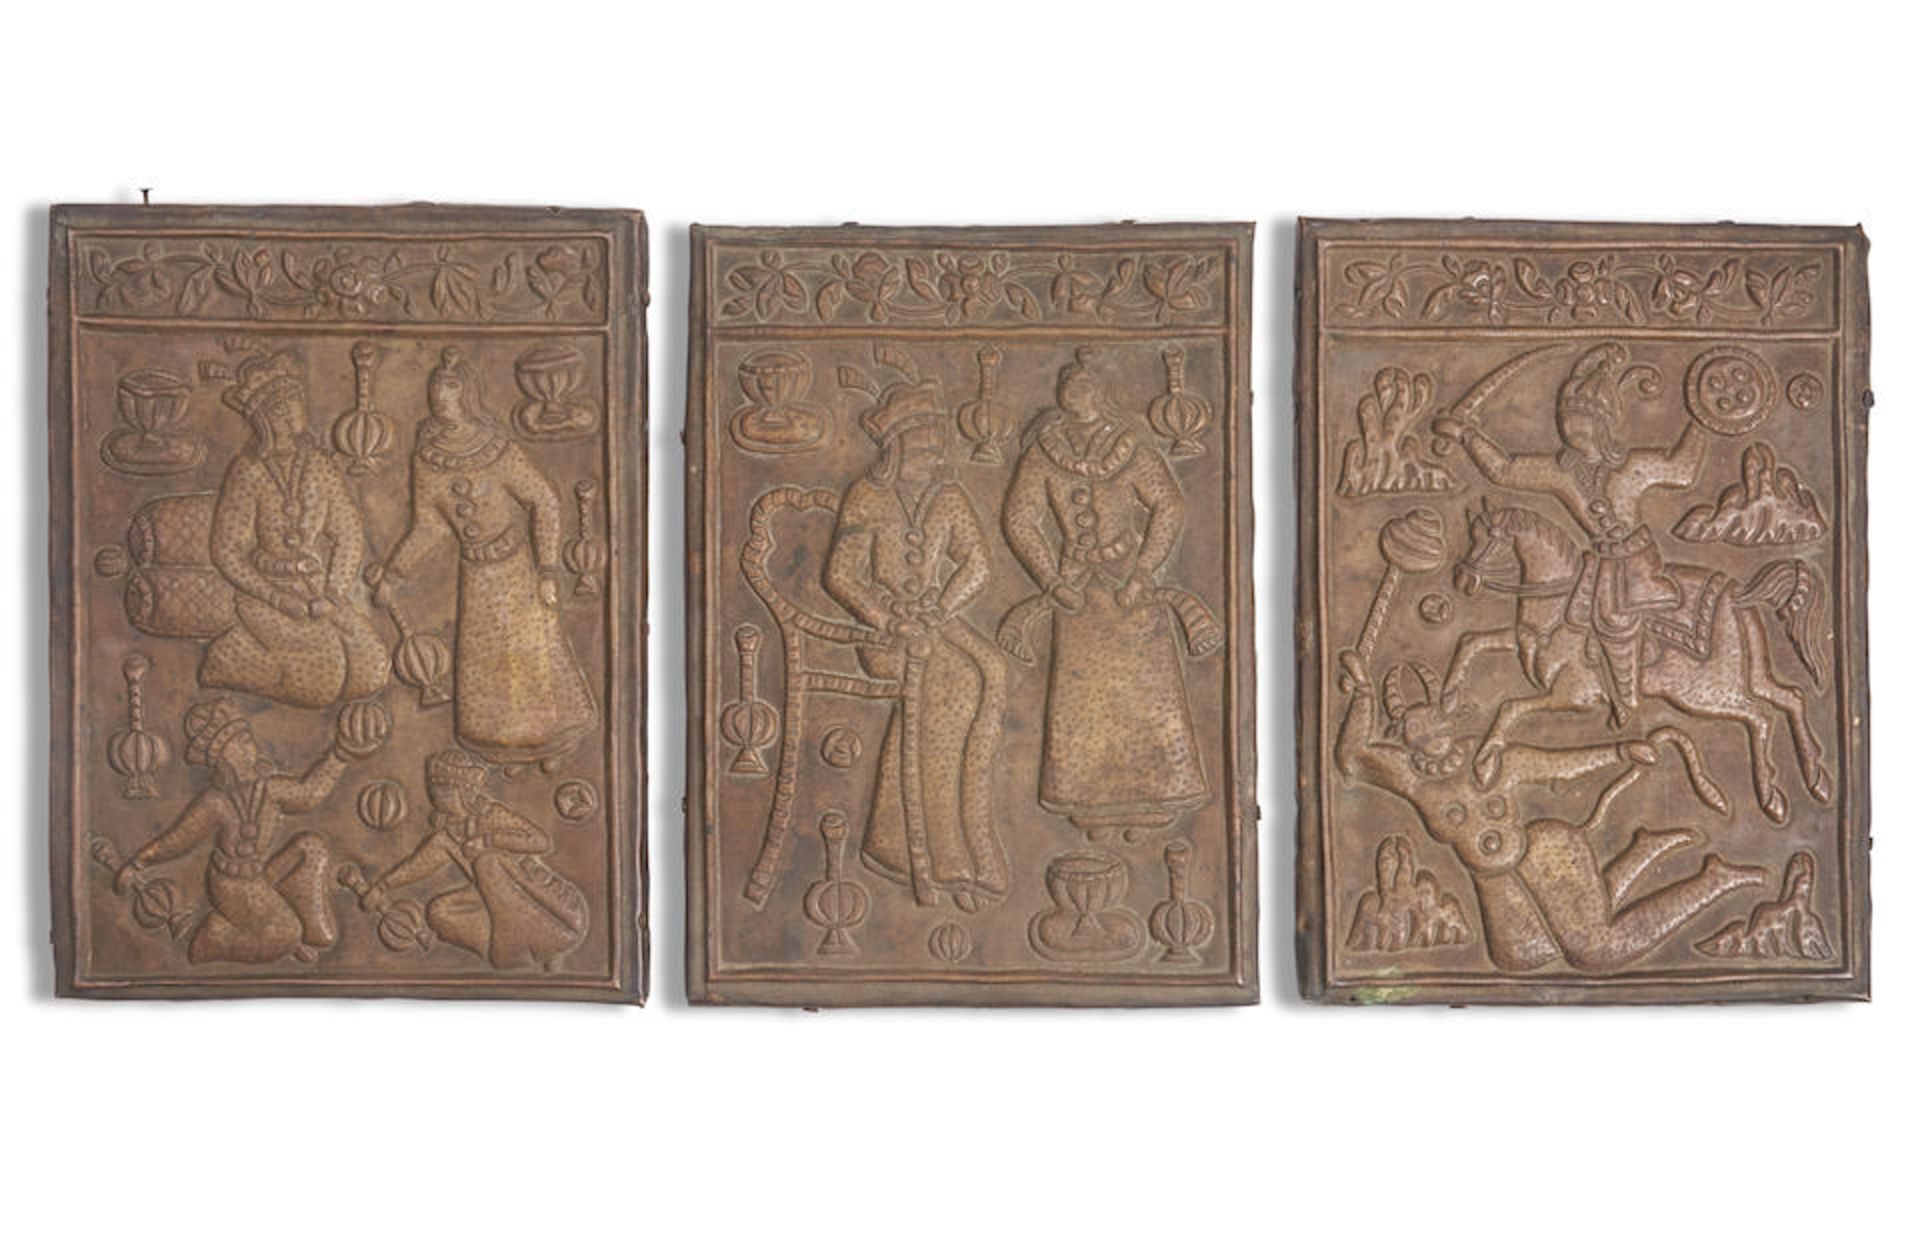 THREE PERSIAN COPPER REPOUSSE PLAQUES MOUNTED ON WOOD PANELS